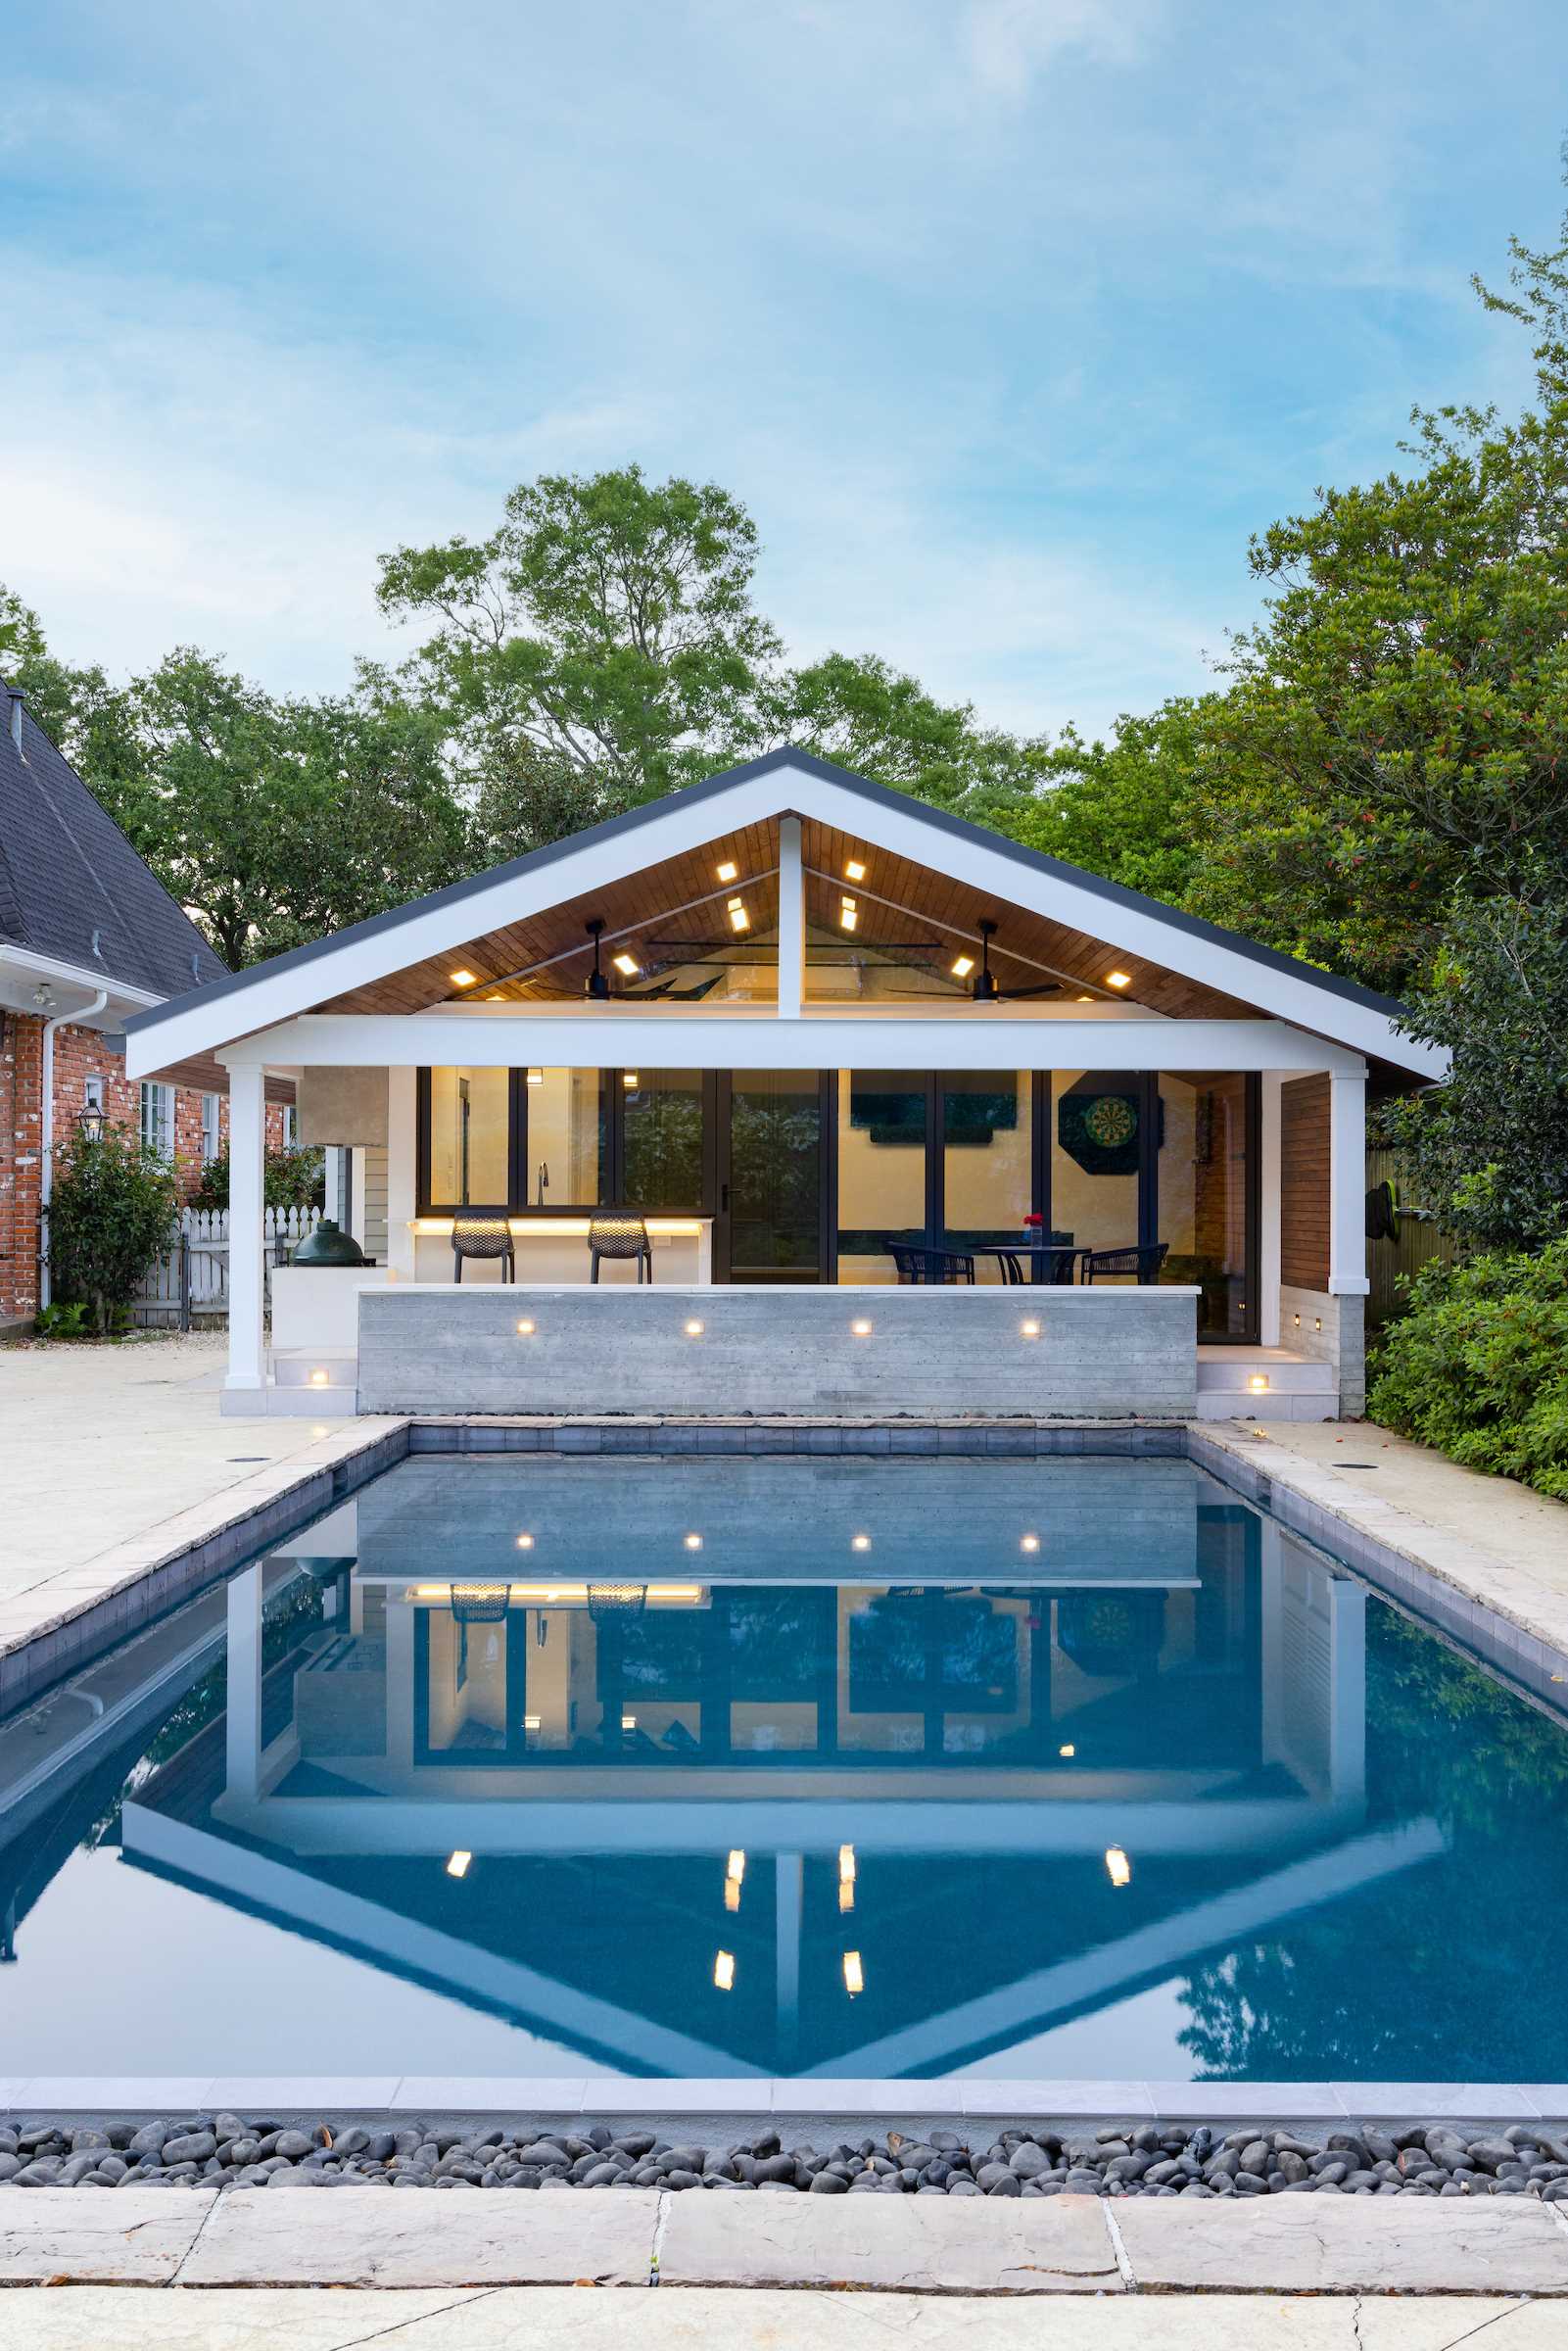 A garage was transformed into a modern pool house with a bar and covered seating.